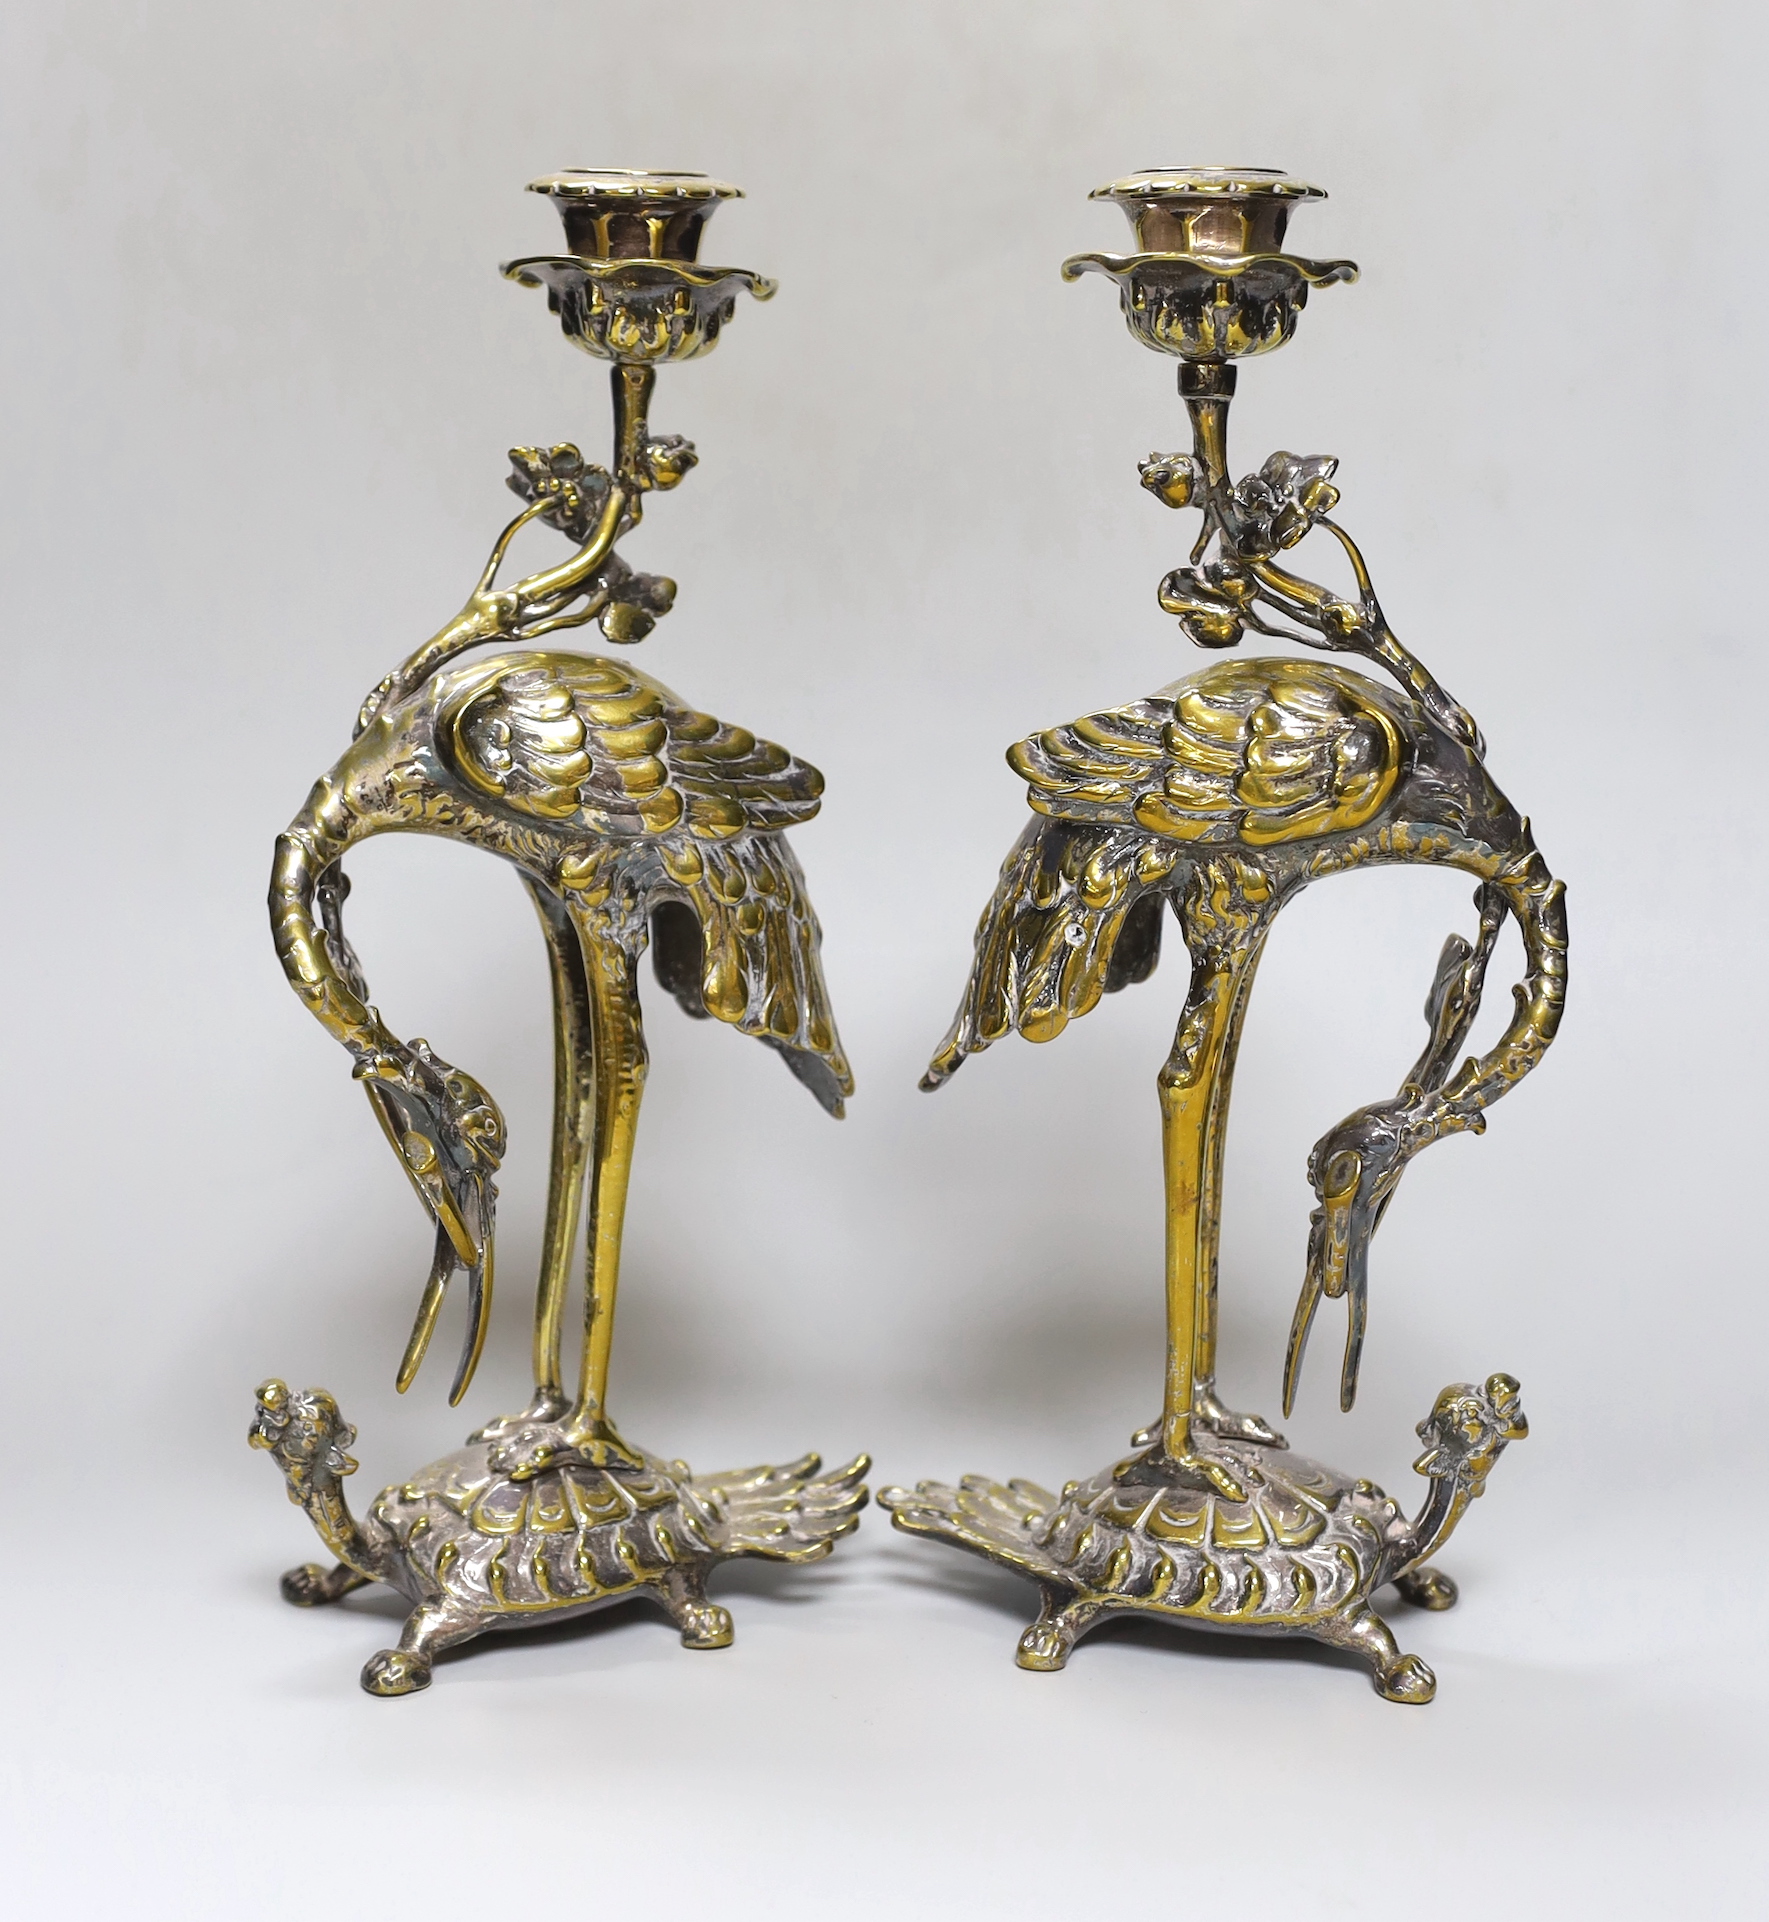 A pair of early 20th century Japanese style silver plated brass ‘crane’ candlesticks                                                                                                                                        